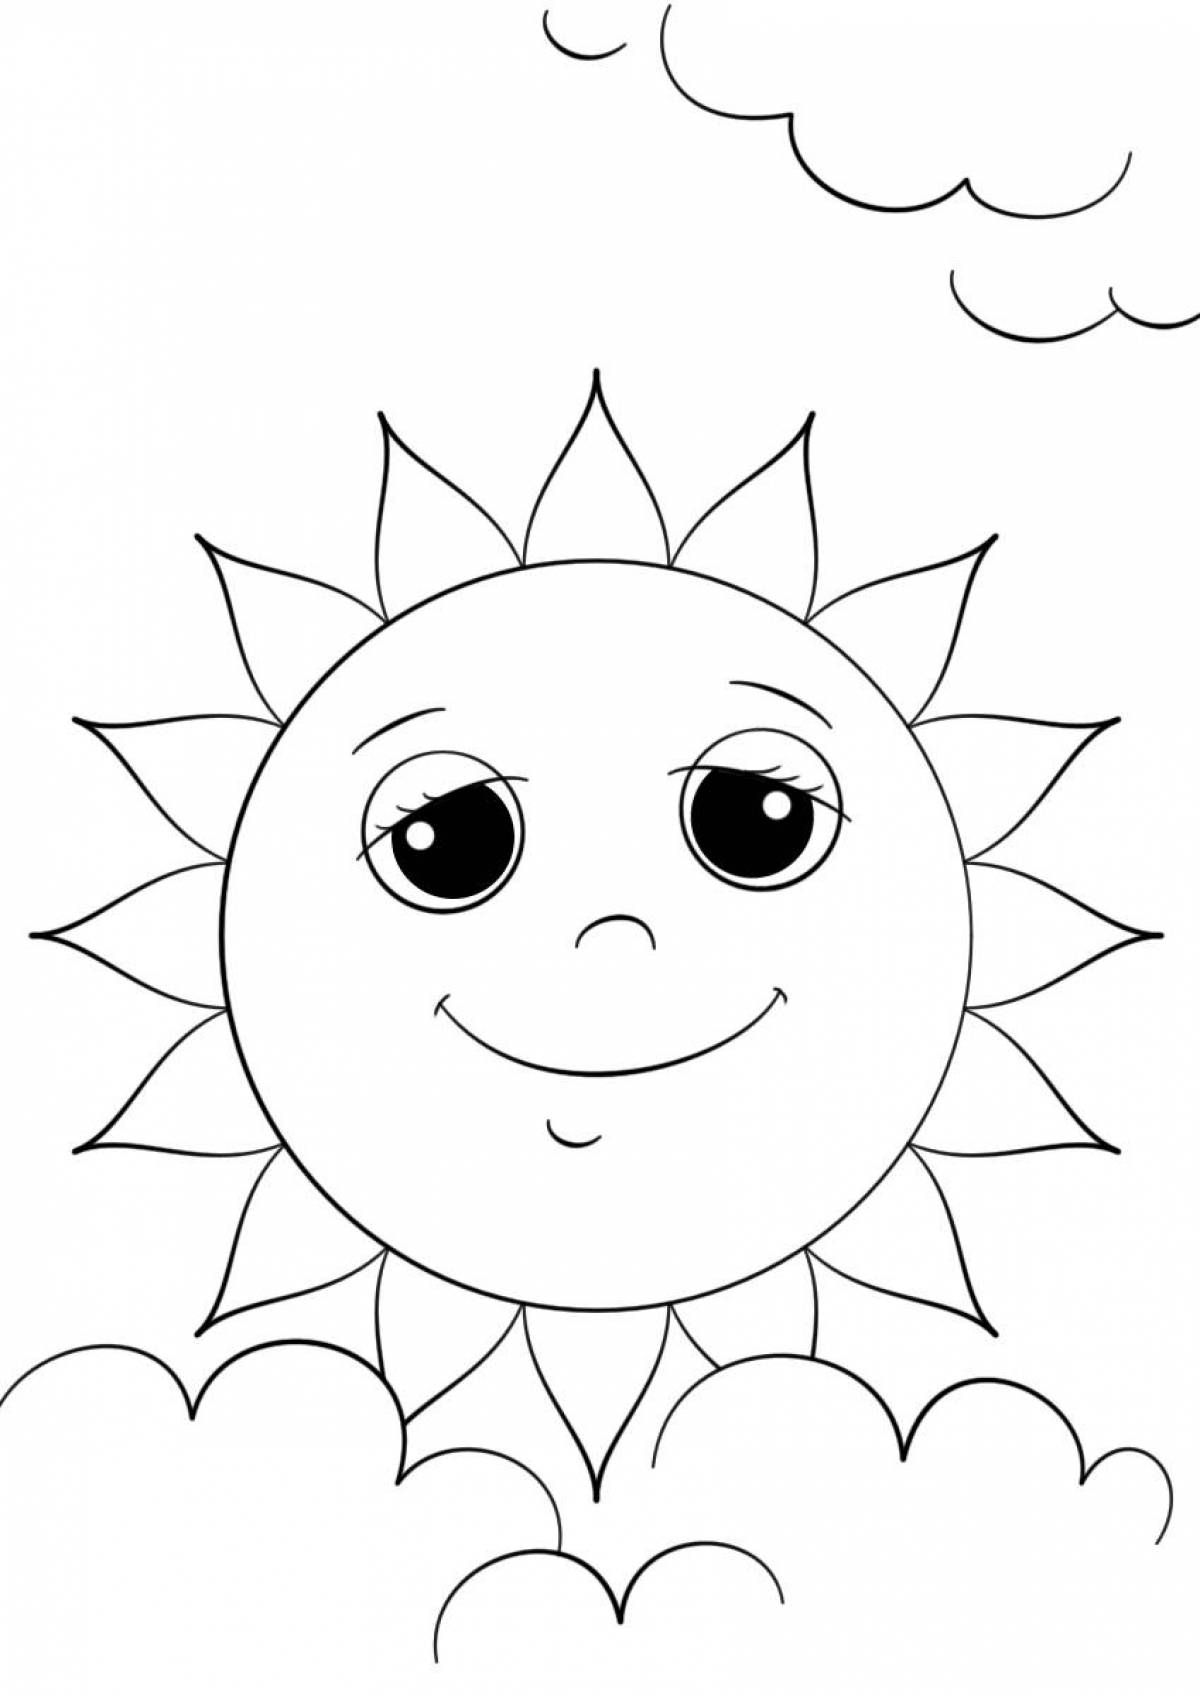 Exquisite sun coloring book for kids